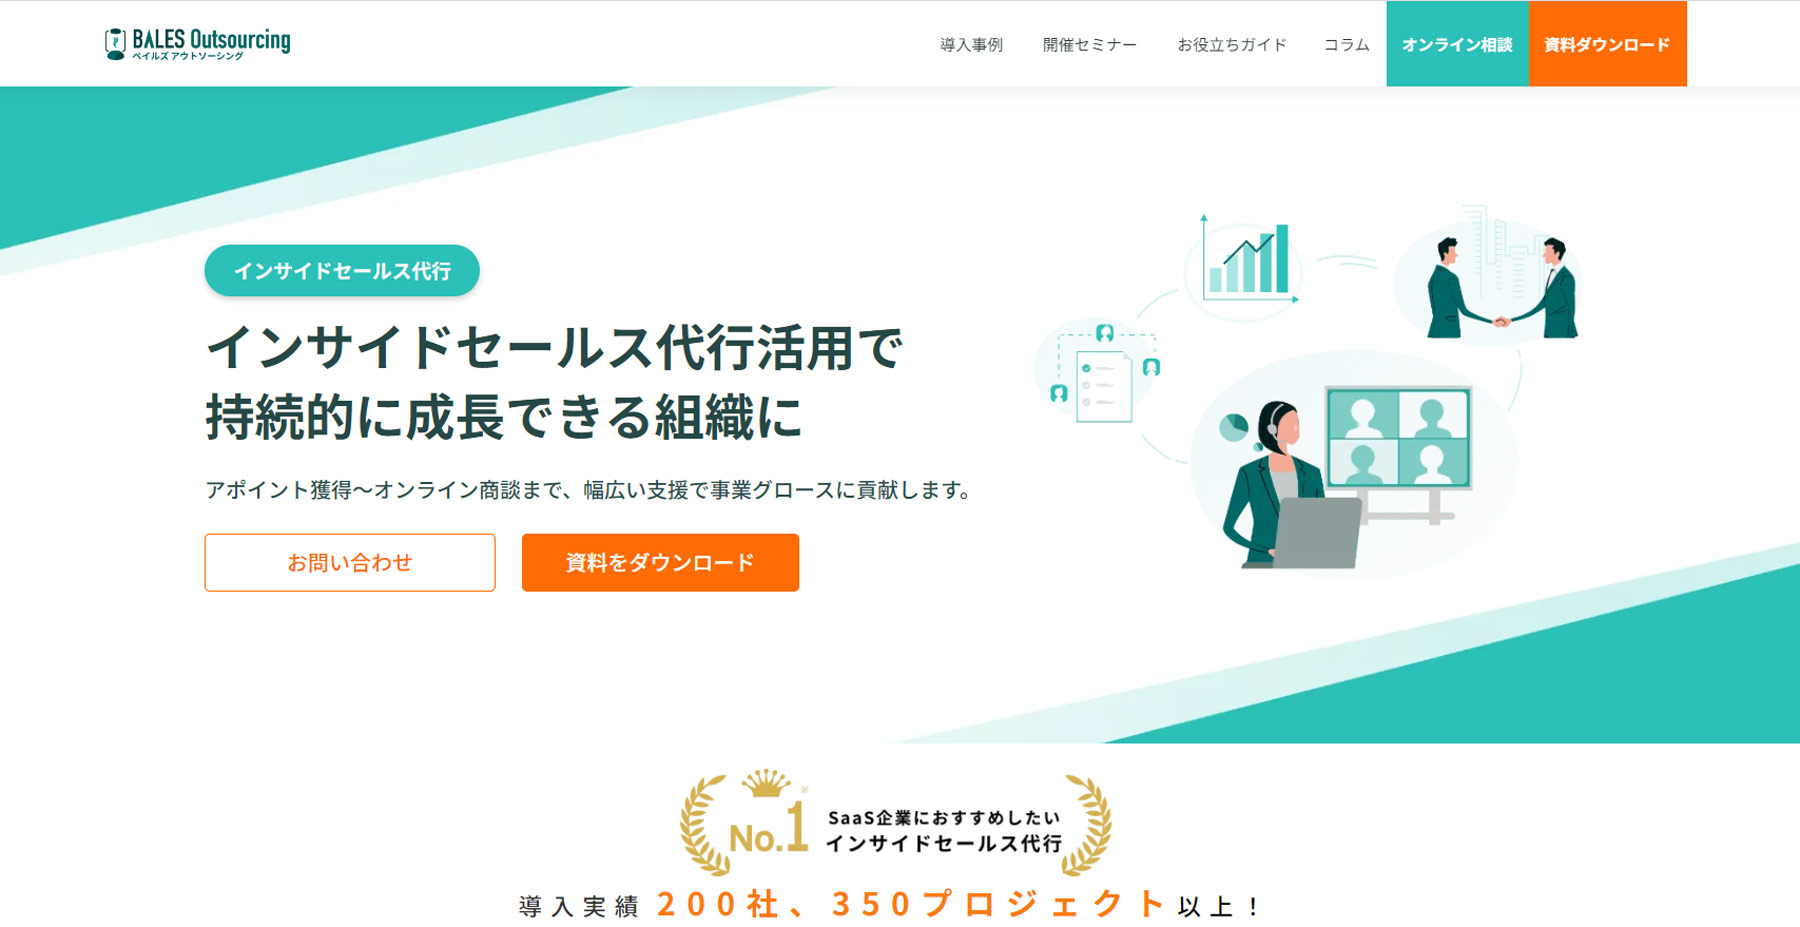 BALES Outsourcing公式Webサイト